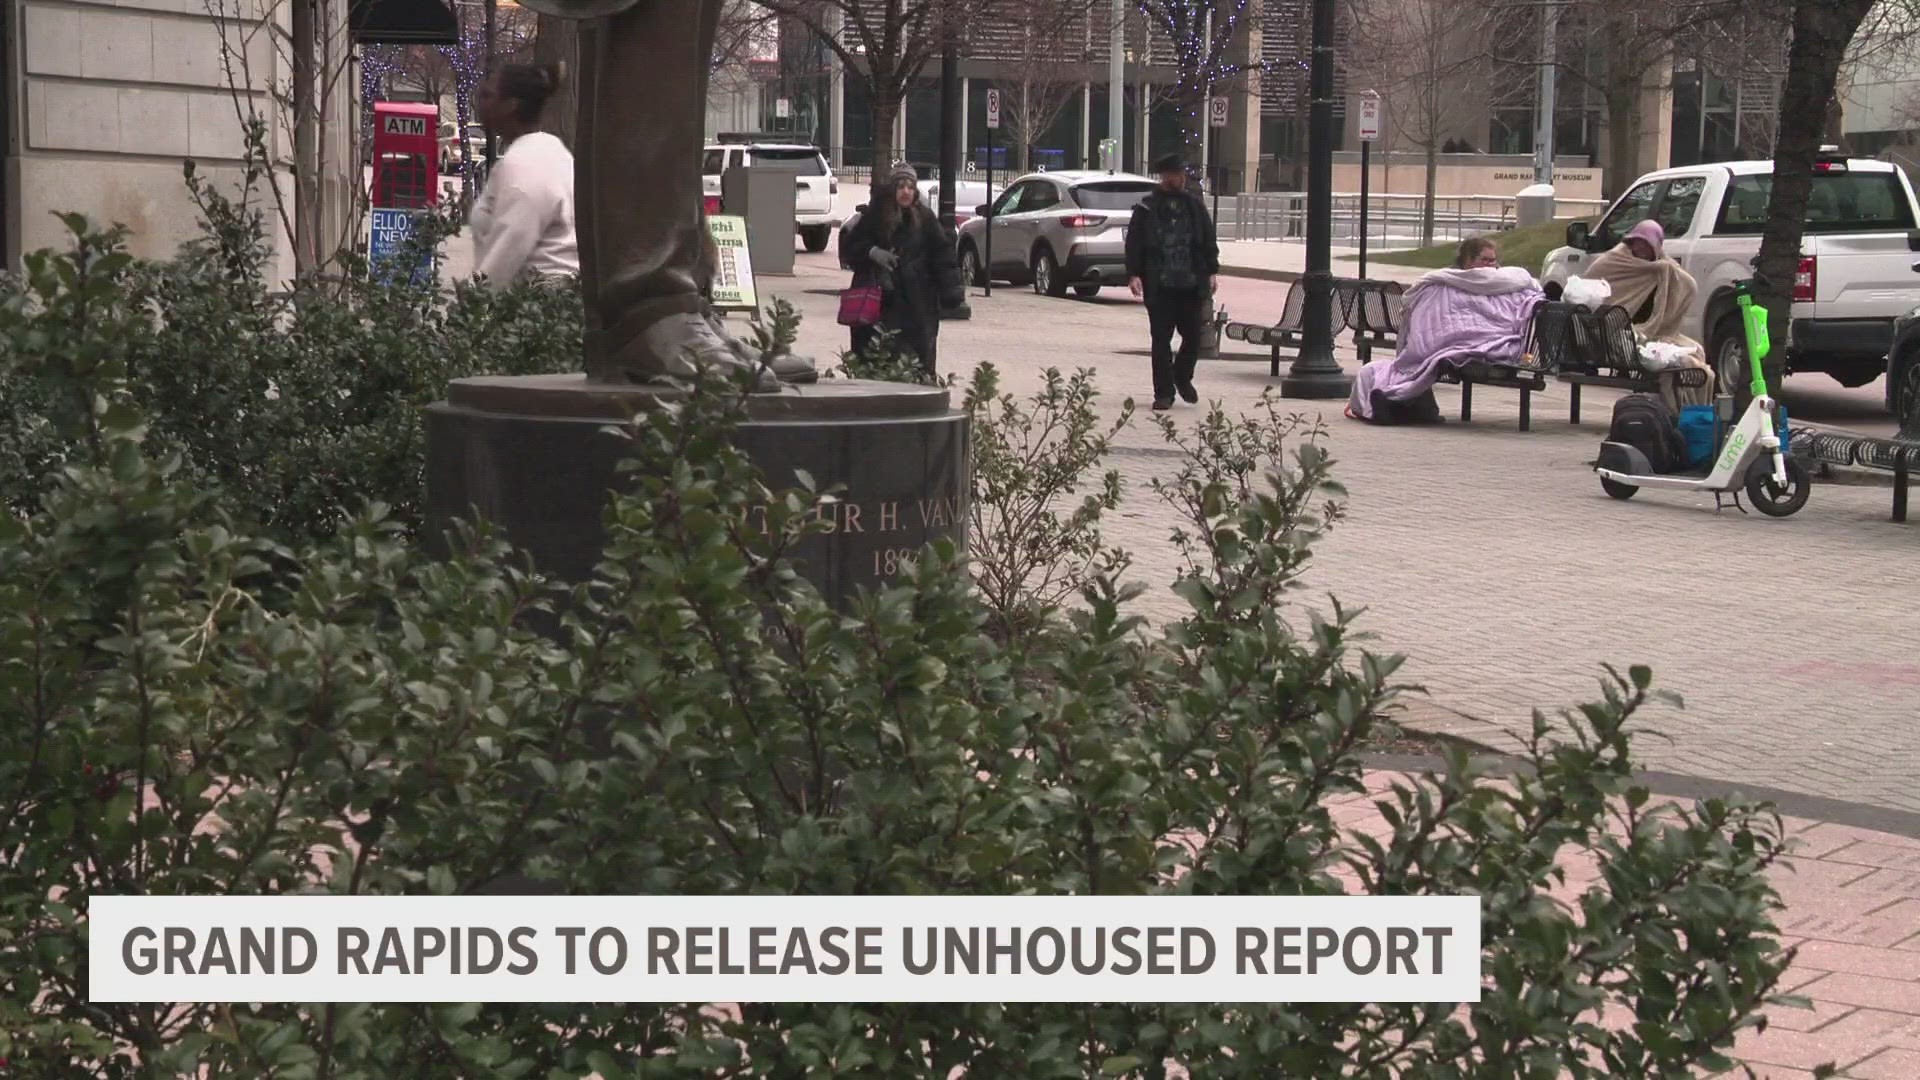 After months of meetings, the City of Grand Rapids is set to unveil its findings regarding the unhoused population.